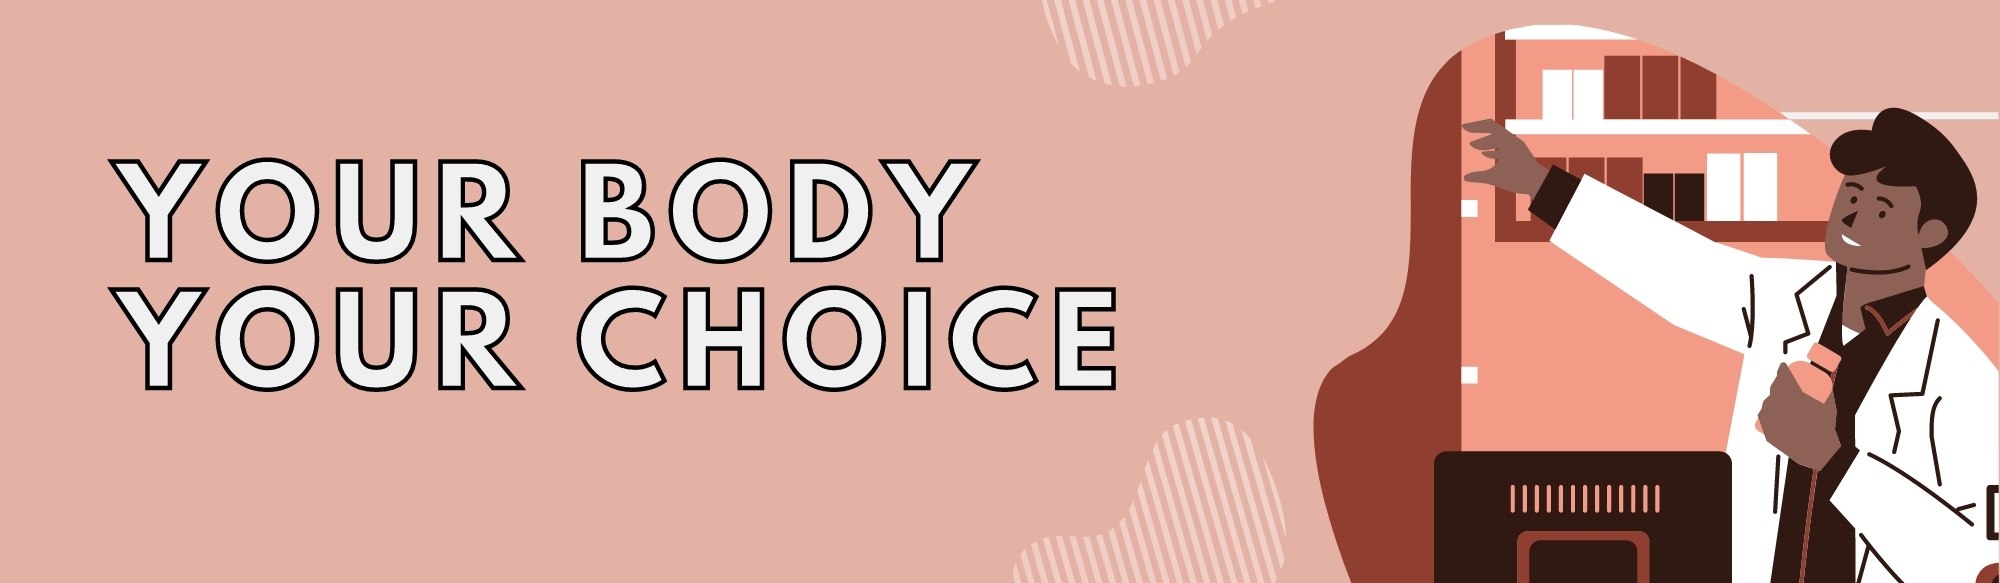 Graphic with a doctor reaching for medicine with the text "your body your choice".